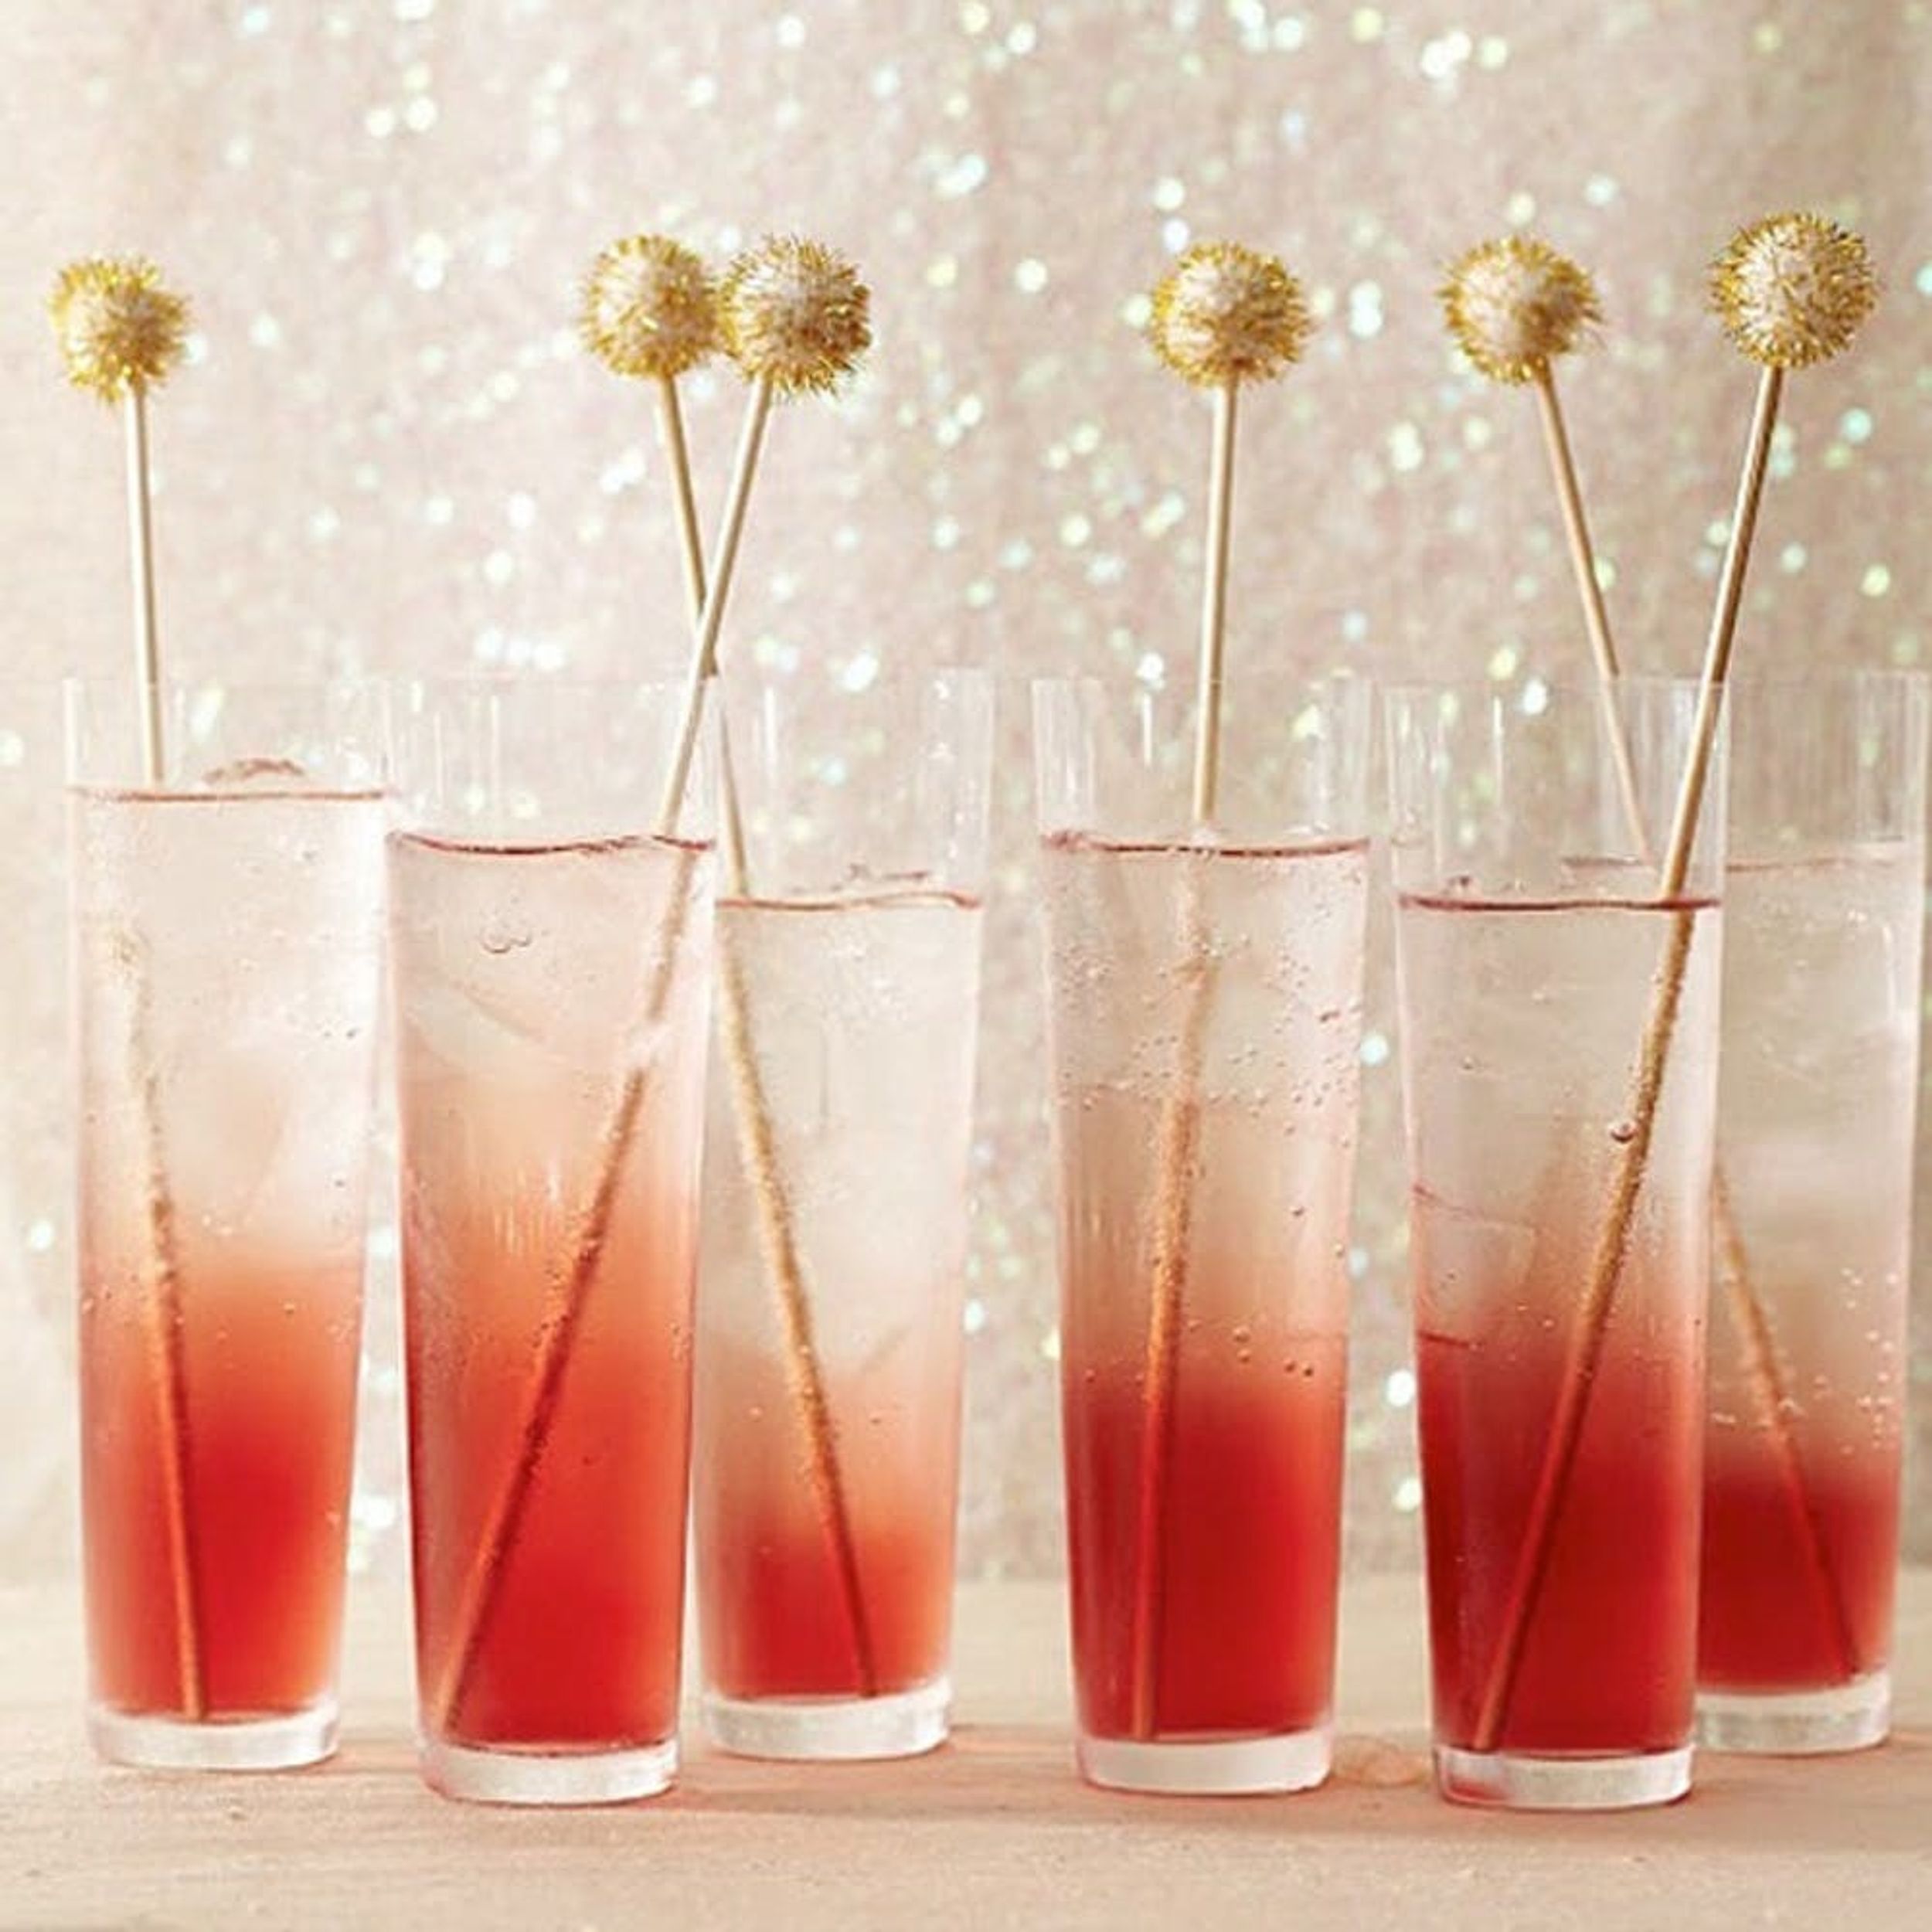 10 Award-Winning Cocktails for Your Oscars Party